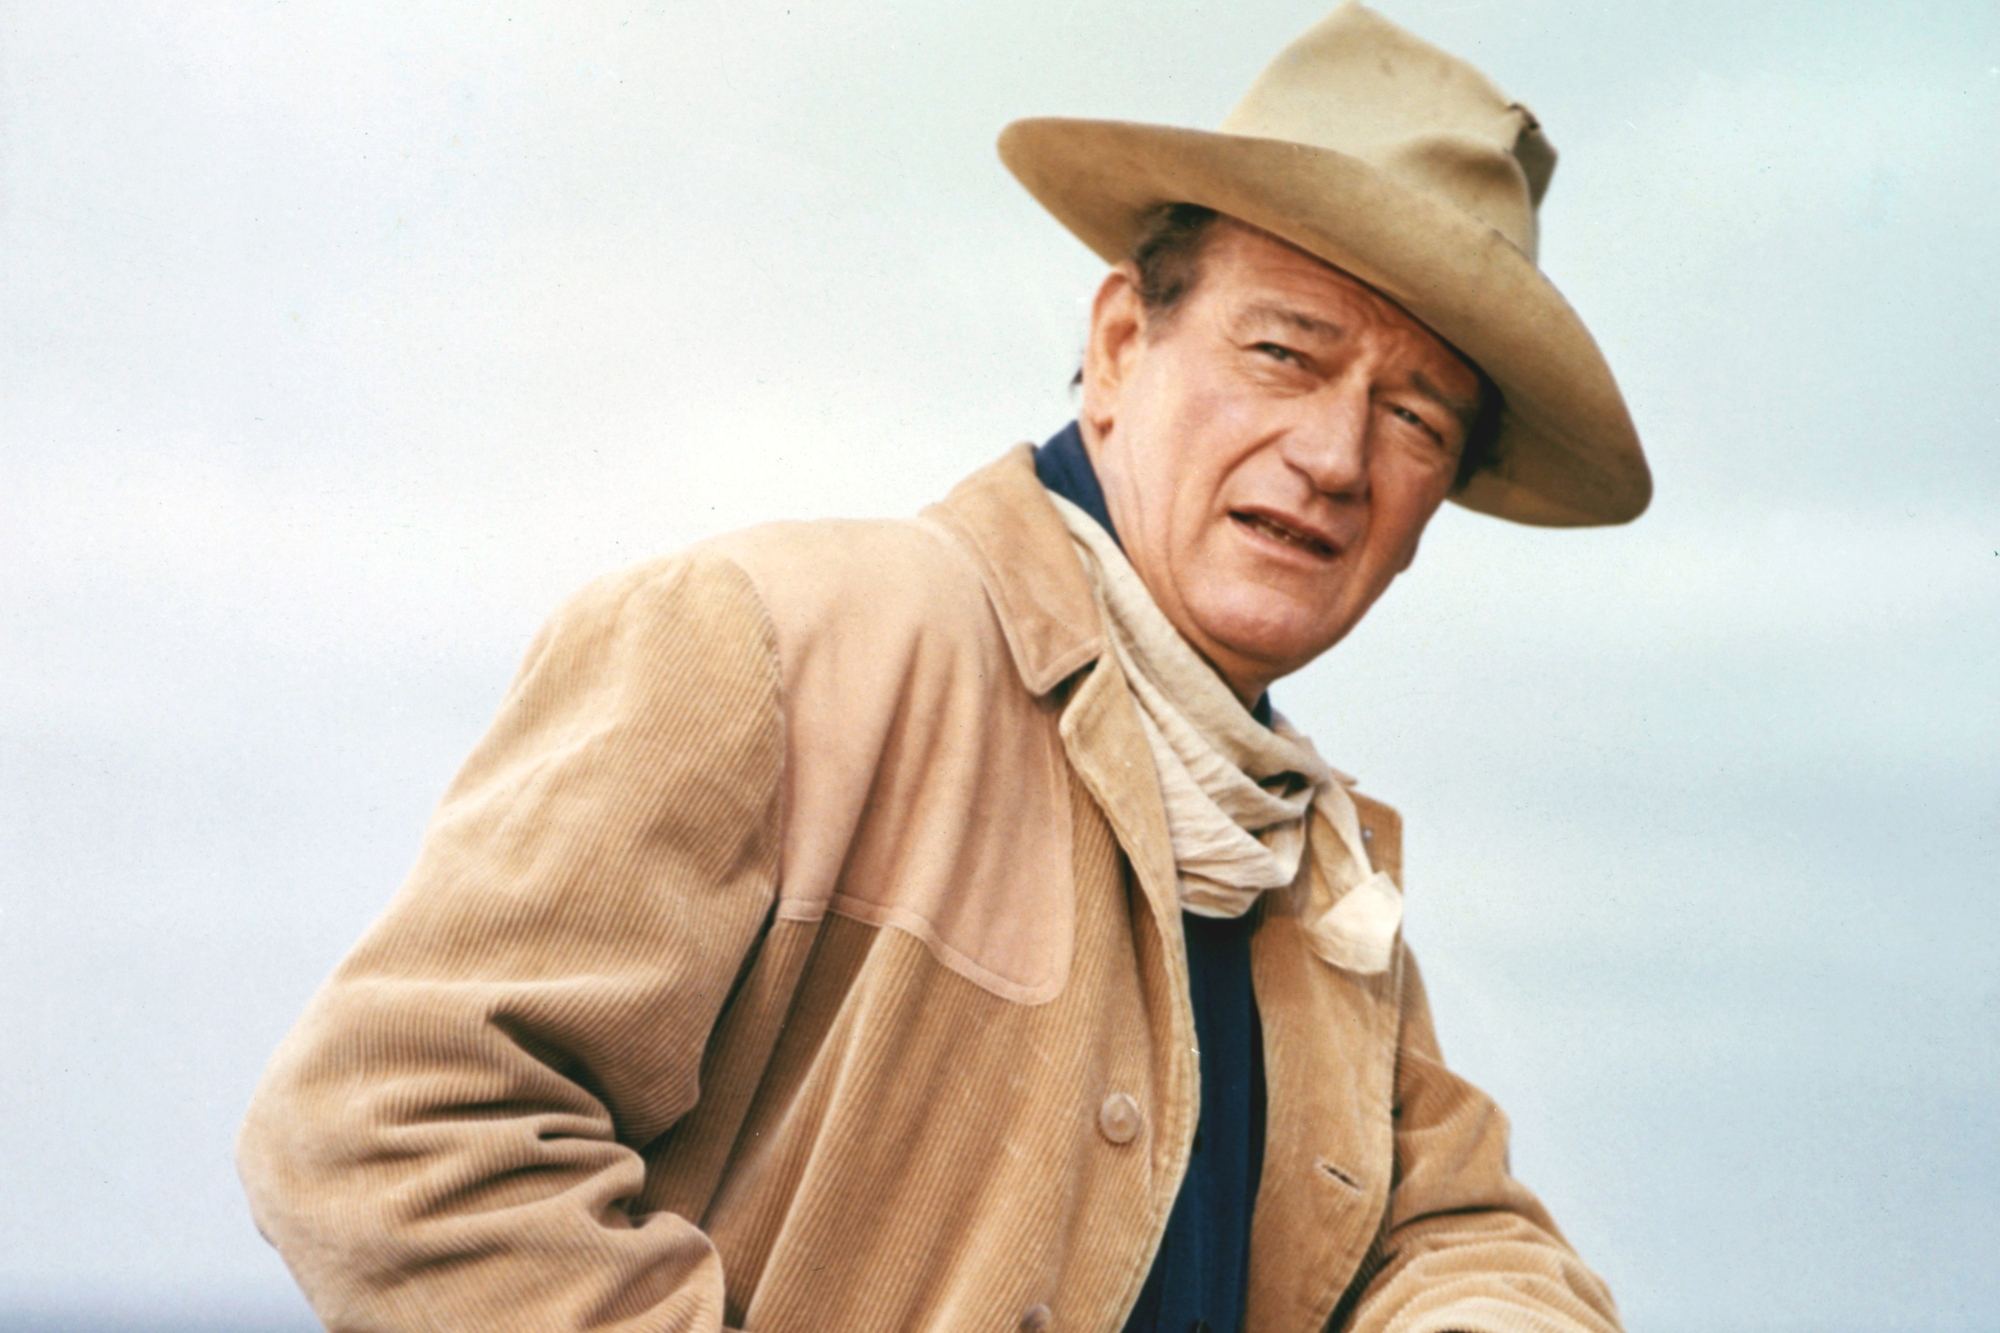 John Wayne, who met former Japanese Emperor Hirohito. He's wearing a cowboy hat and costume, looking at the camera